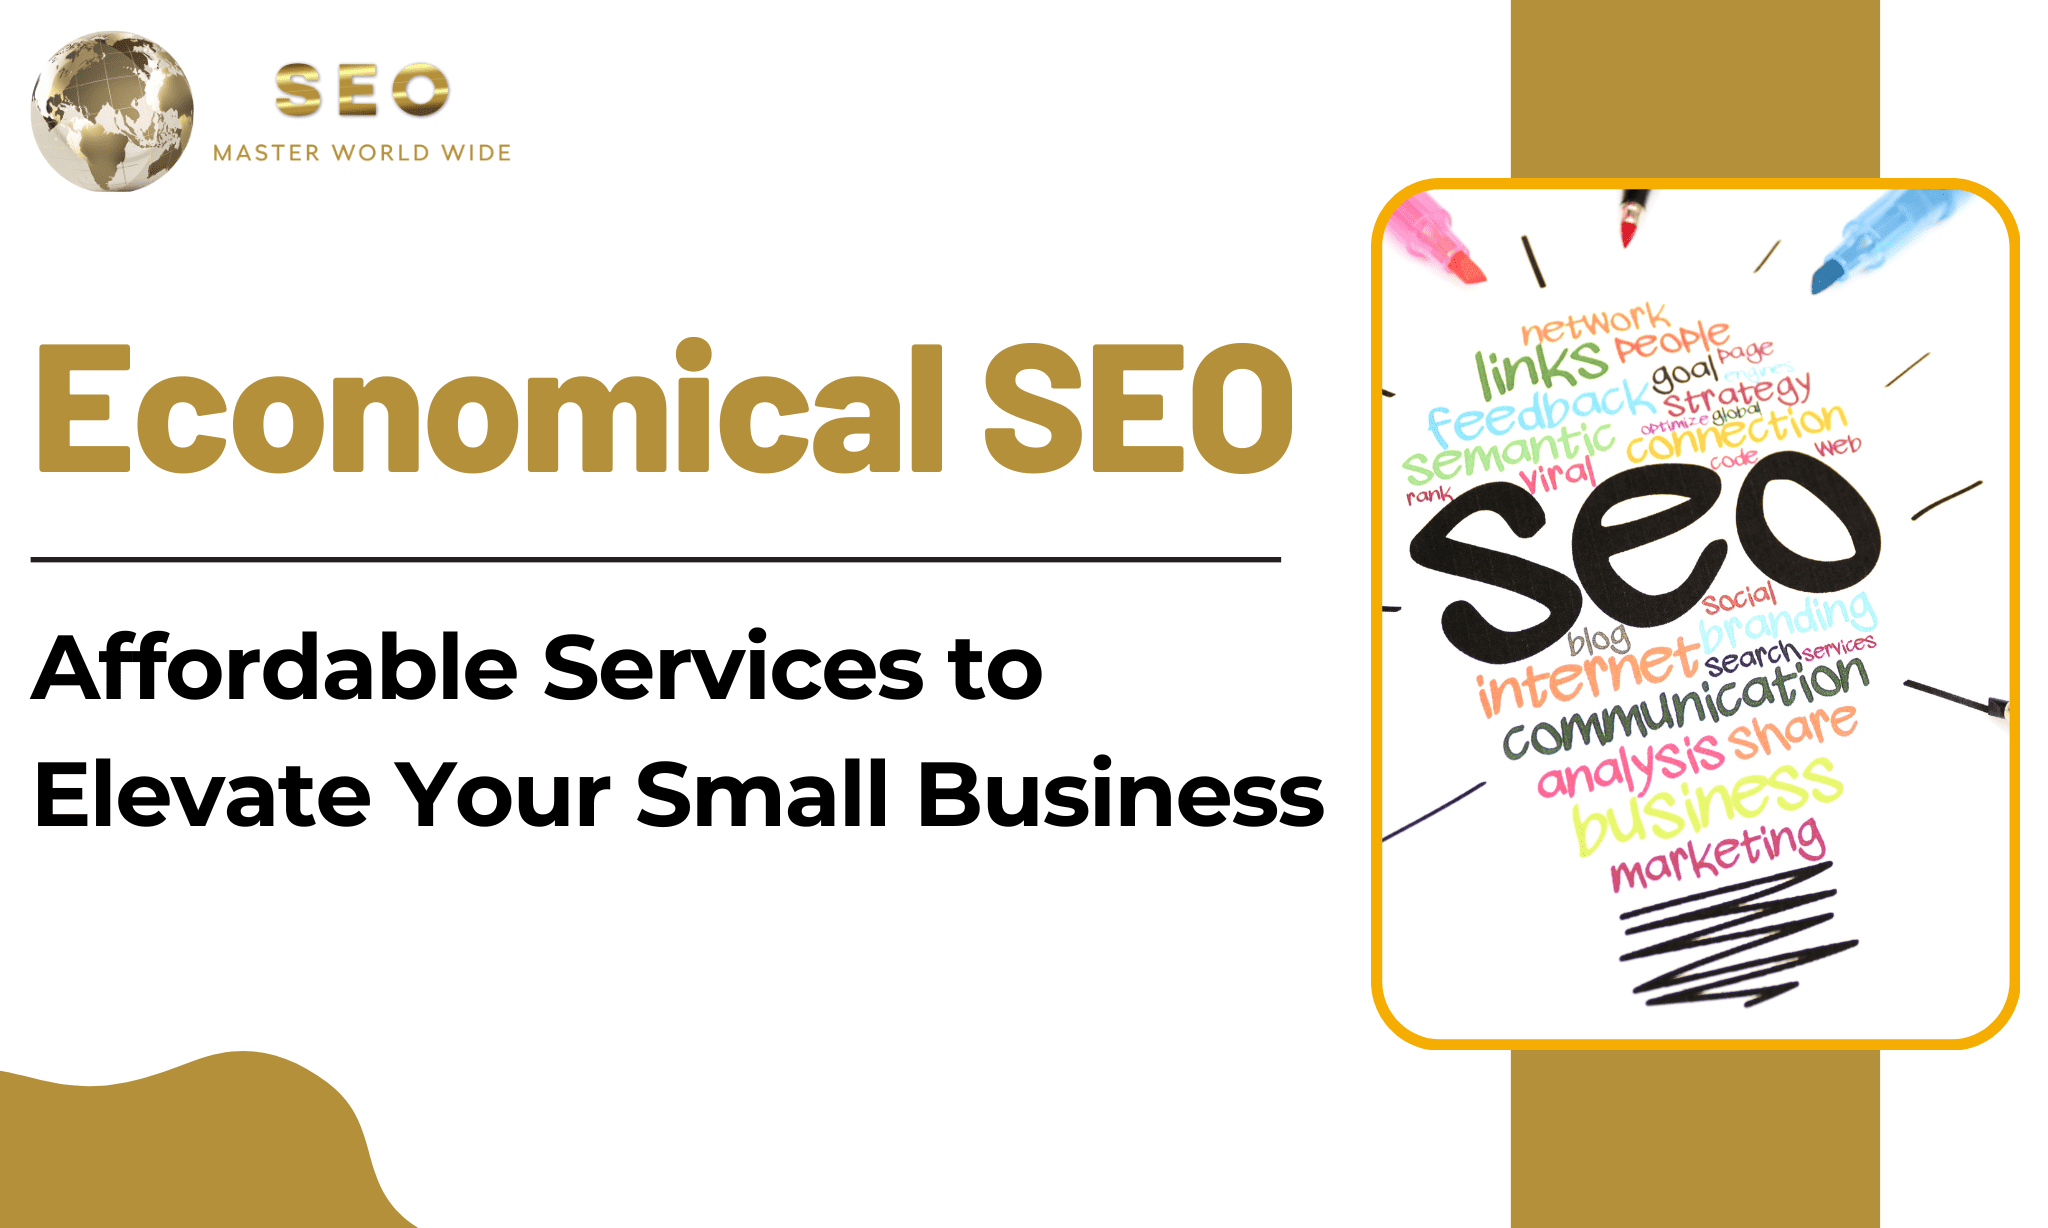 SEO Master Worldwide - SEO Services_Affordable SEO Services for Small Businesses